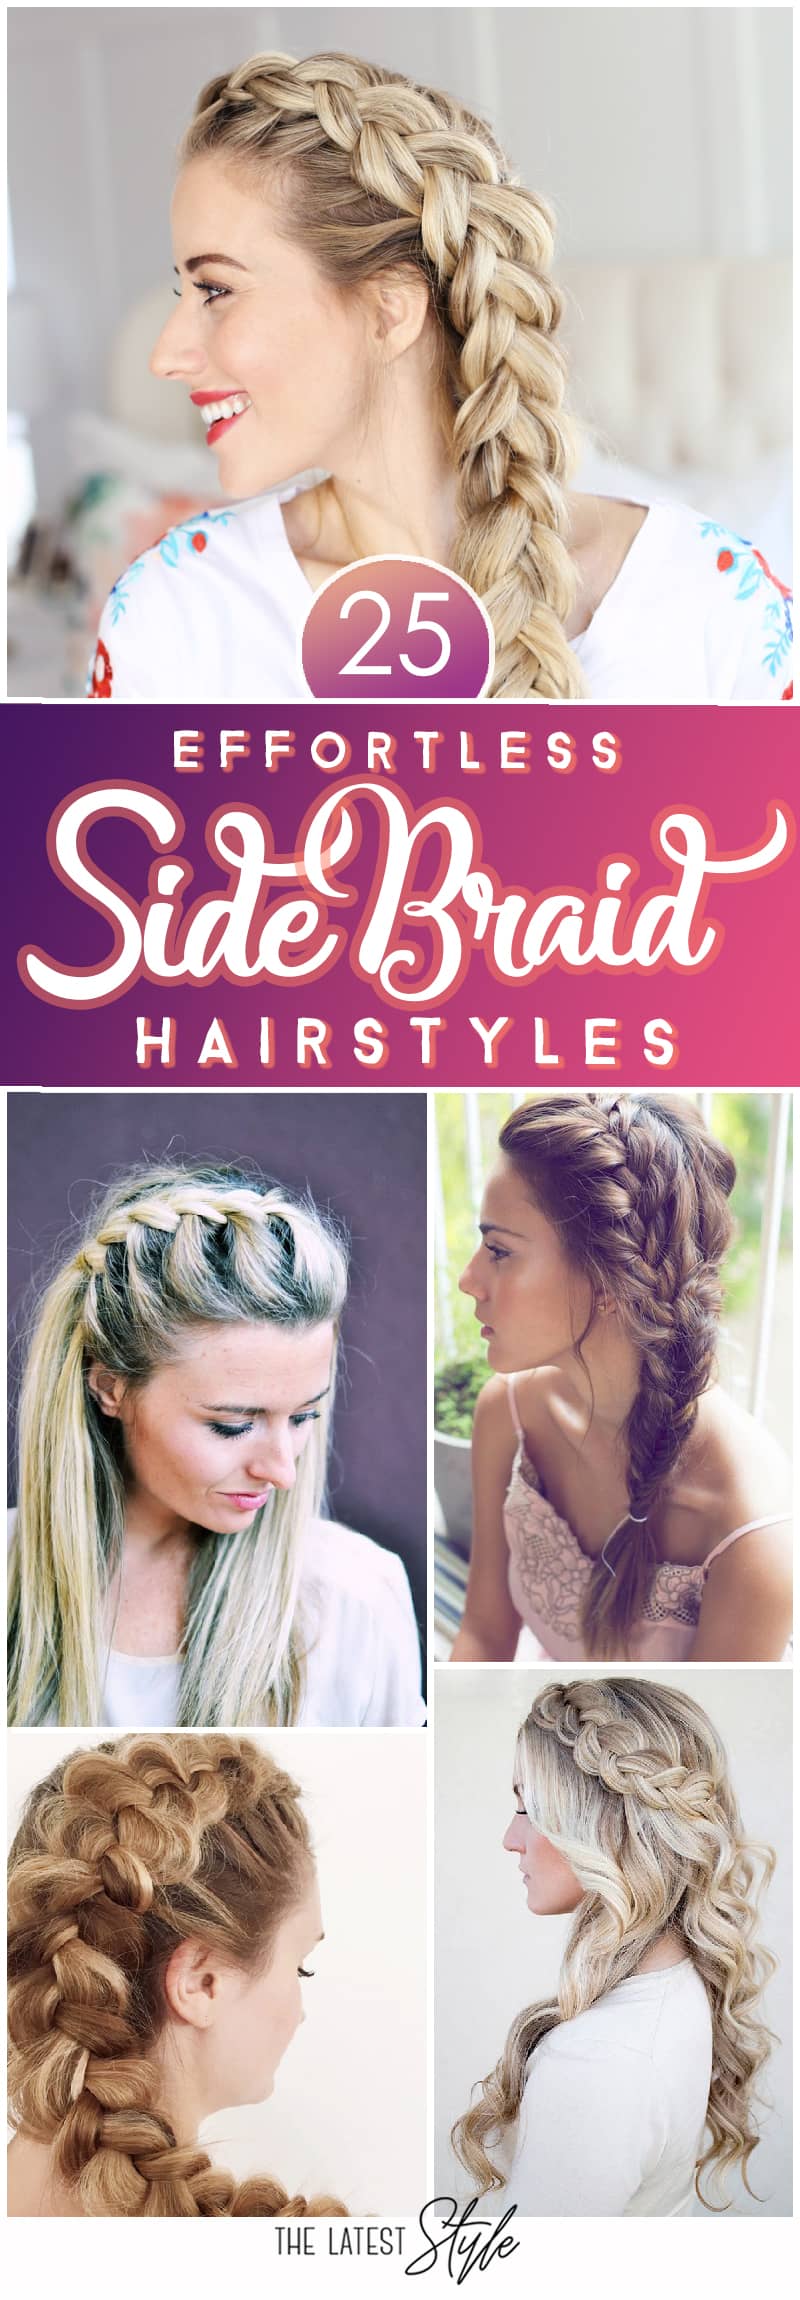 25 Effortless Side Braid Hairstyles to Make You Feel Special